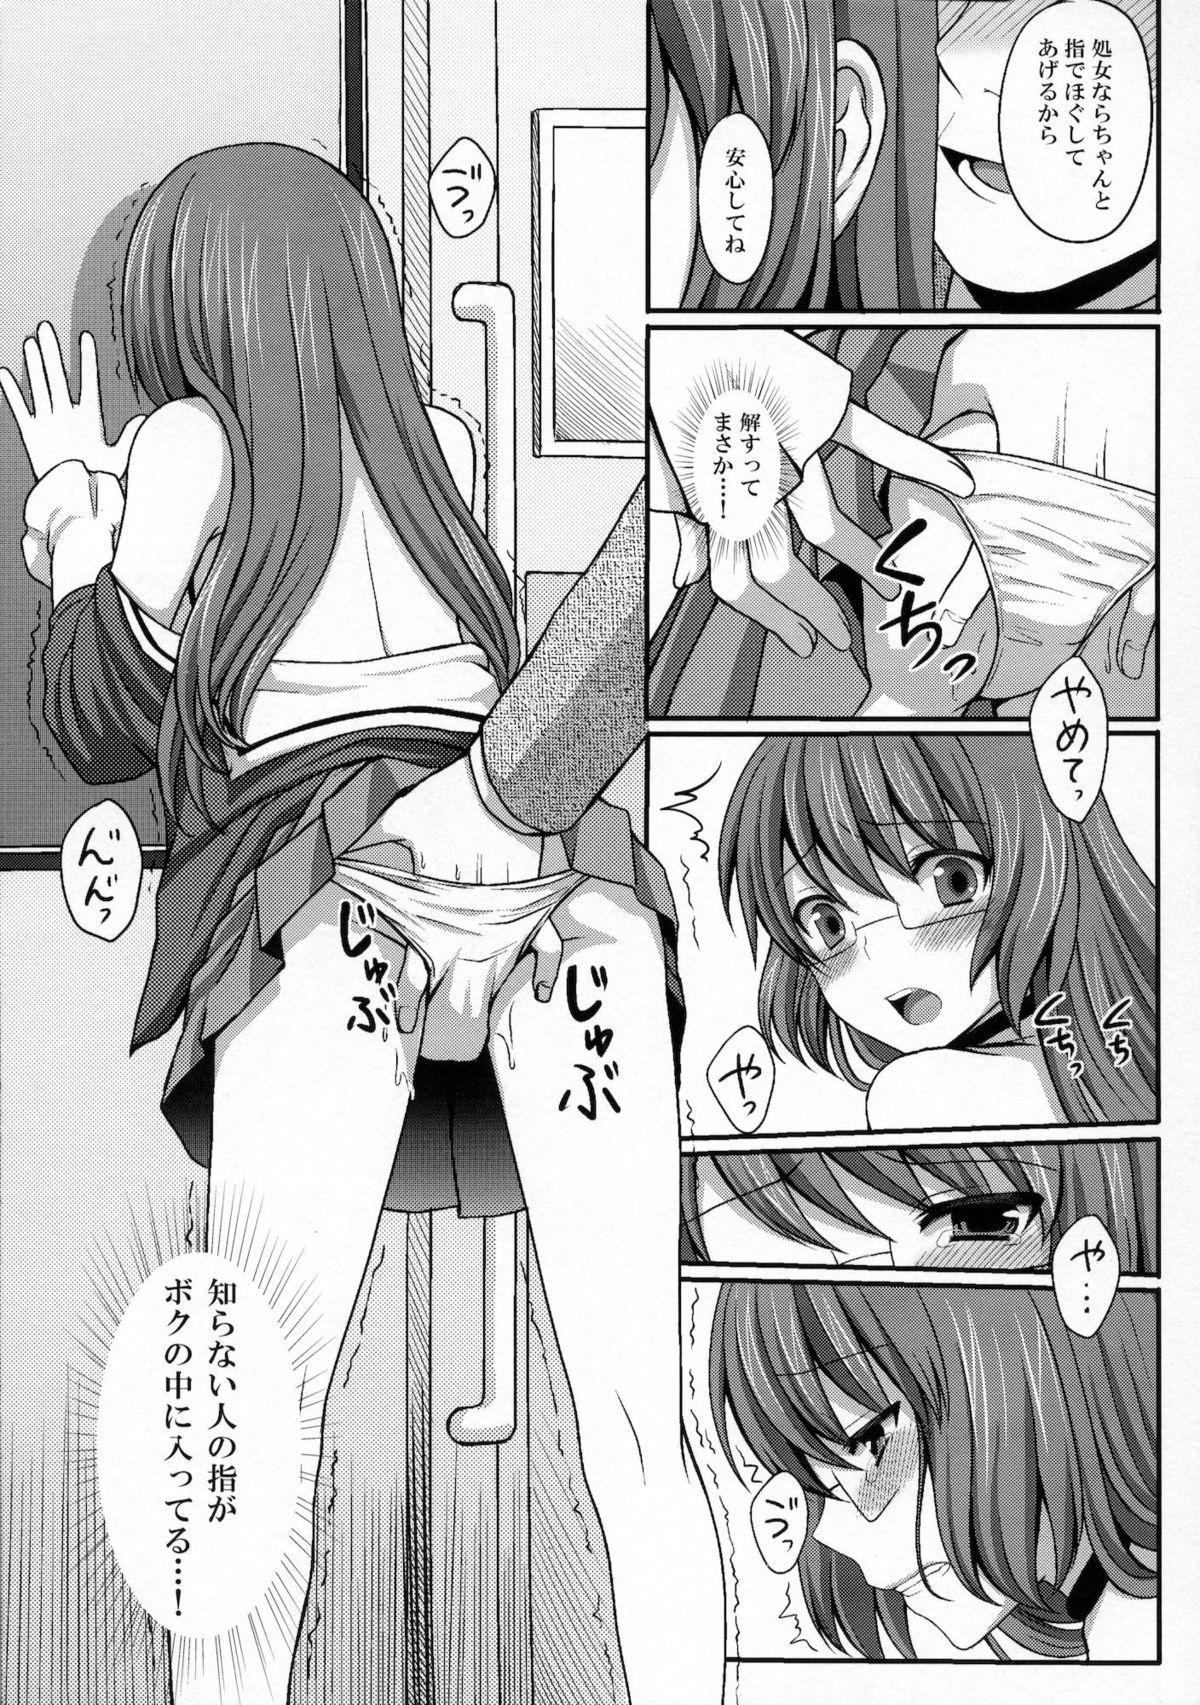 Reality Kami-sama o Chikan - The world god only knows Camgirl - Page 8